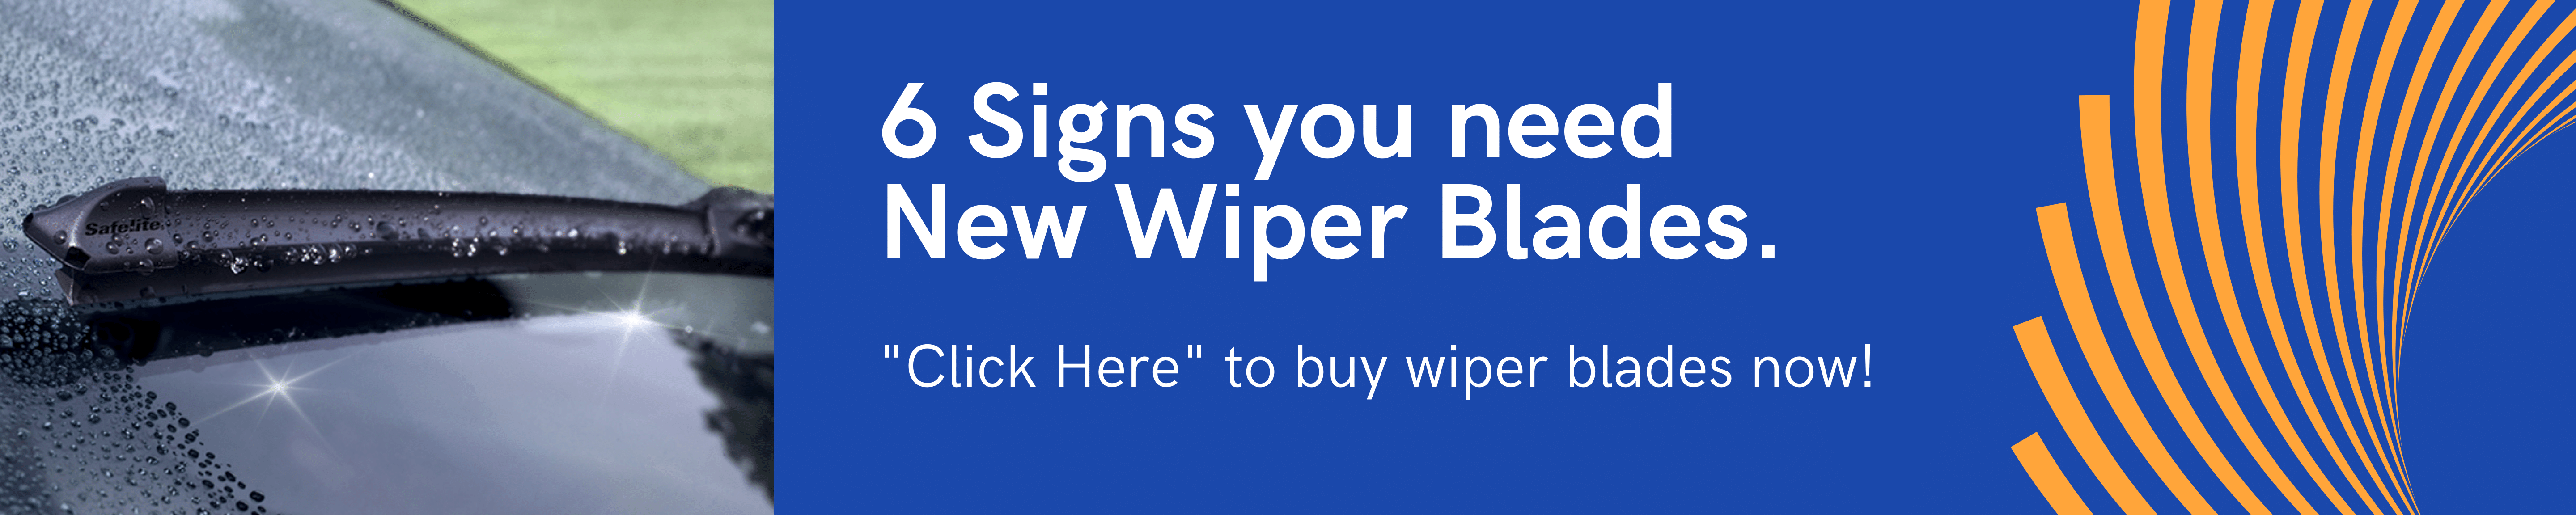 Signs You Need New Wiper Blades